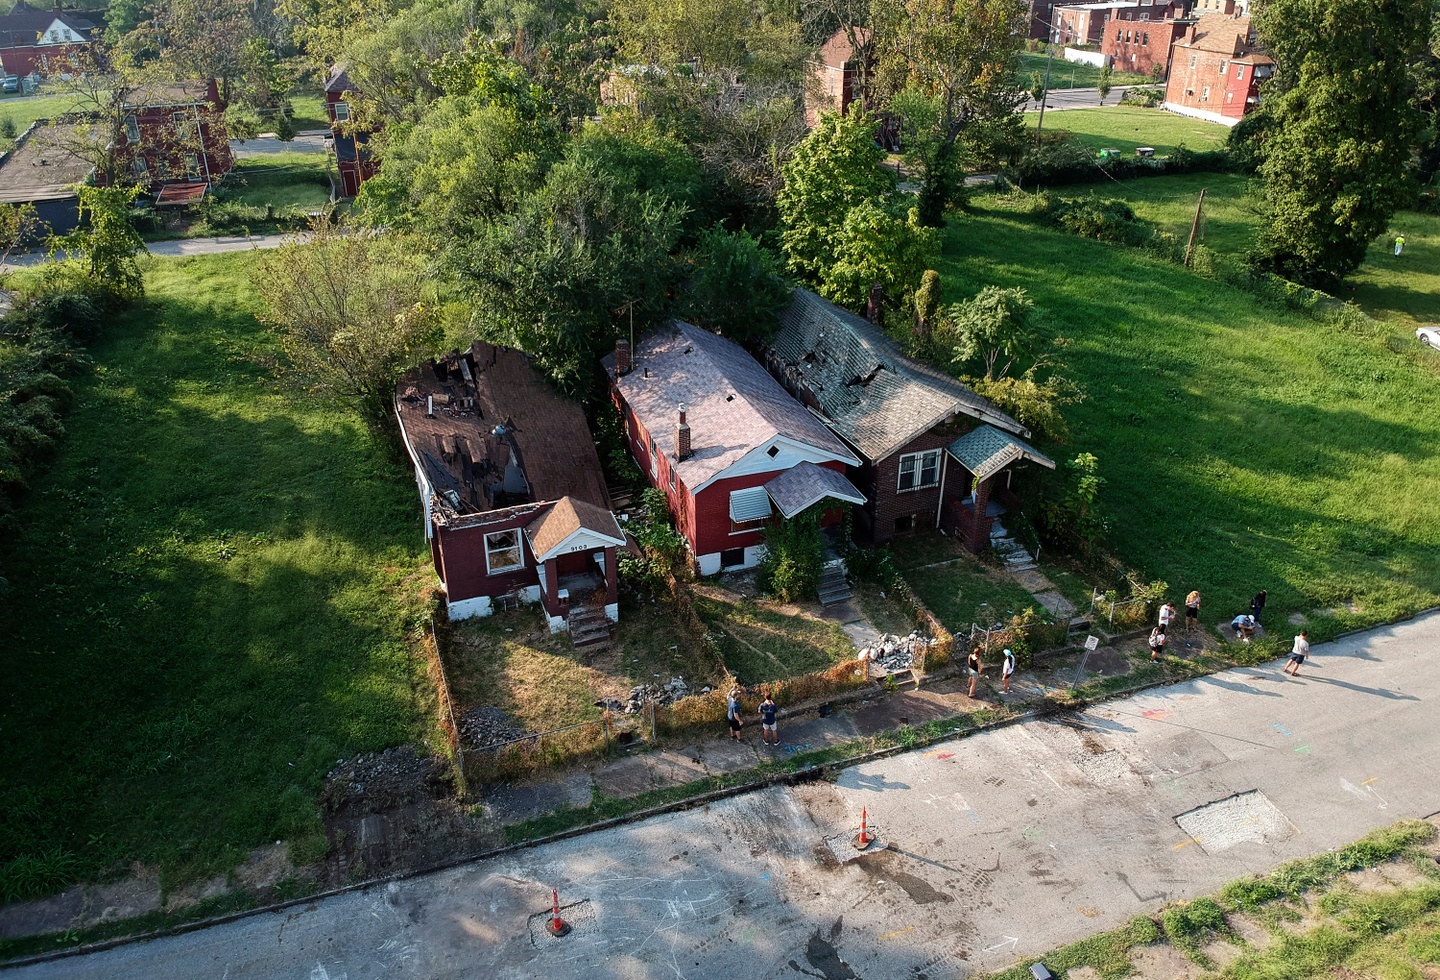 Drone photo of three brick houses side by side on a block, empty lots on either side, all with obvious damage to their roofs and structures and heavy overgrowth in the backyards.